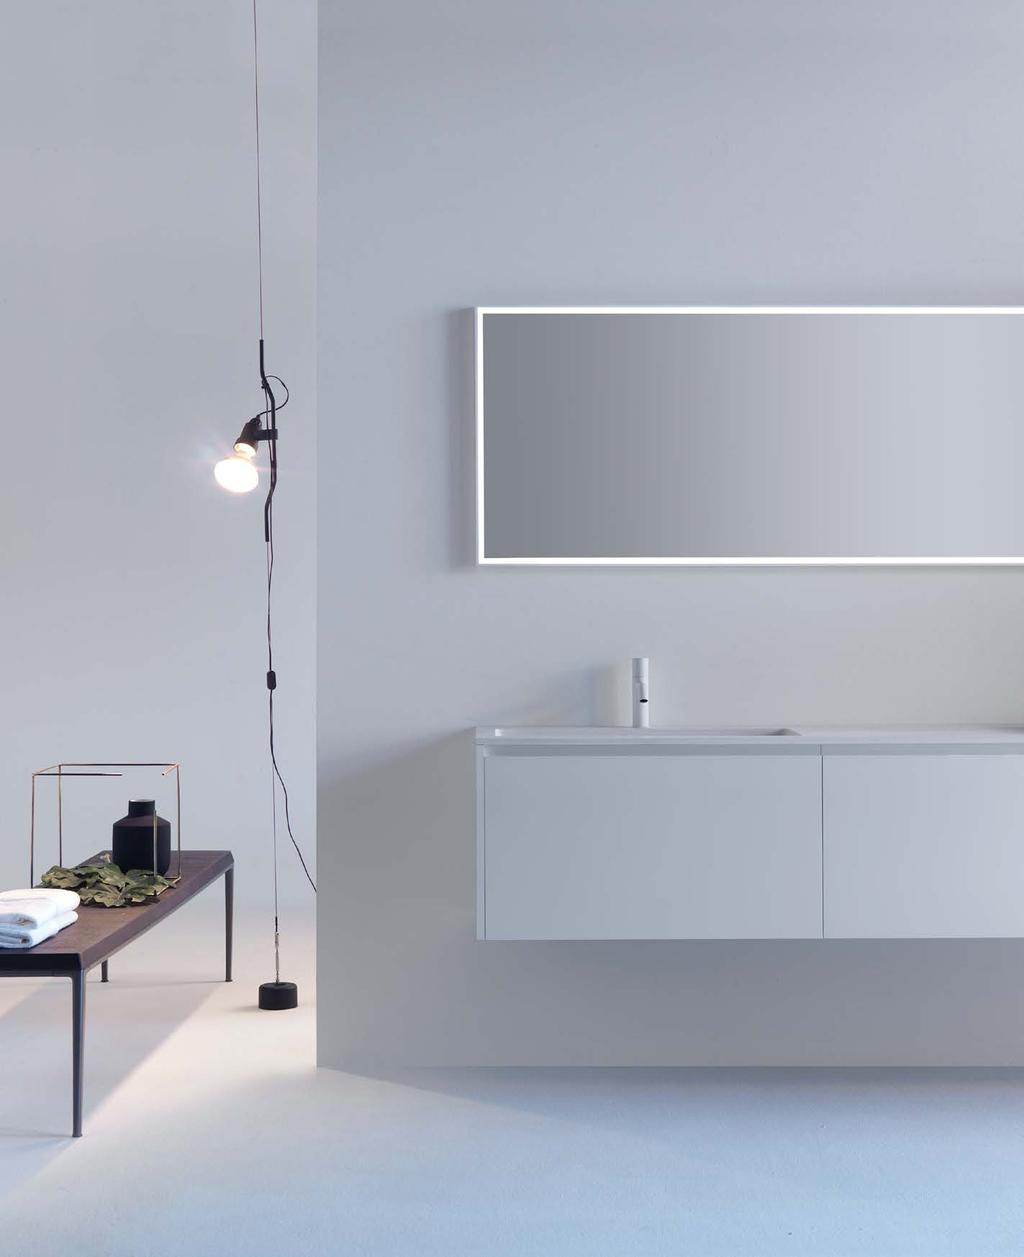 / VIAVENETO G ELEMENTS composition consisting of integrated Cristalplant Biobased top measuring 240 x 45 x h 7 cm with EXTREME FLAT integrated washbasin and two side drawer bases with central drawer